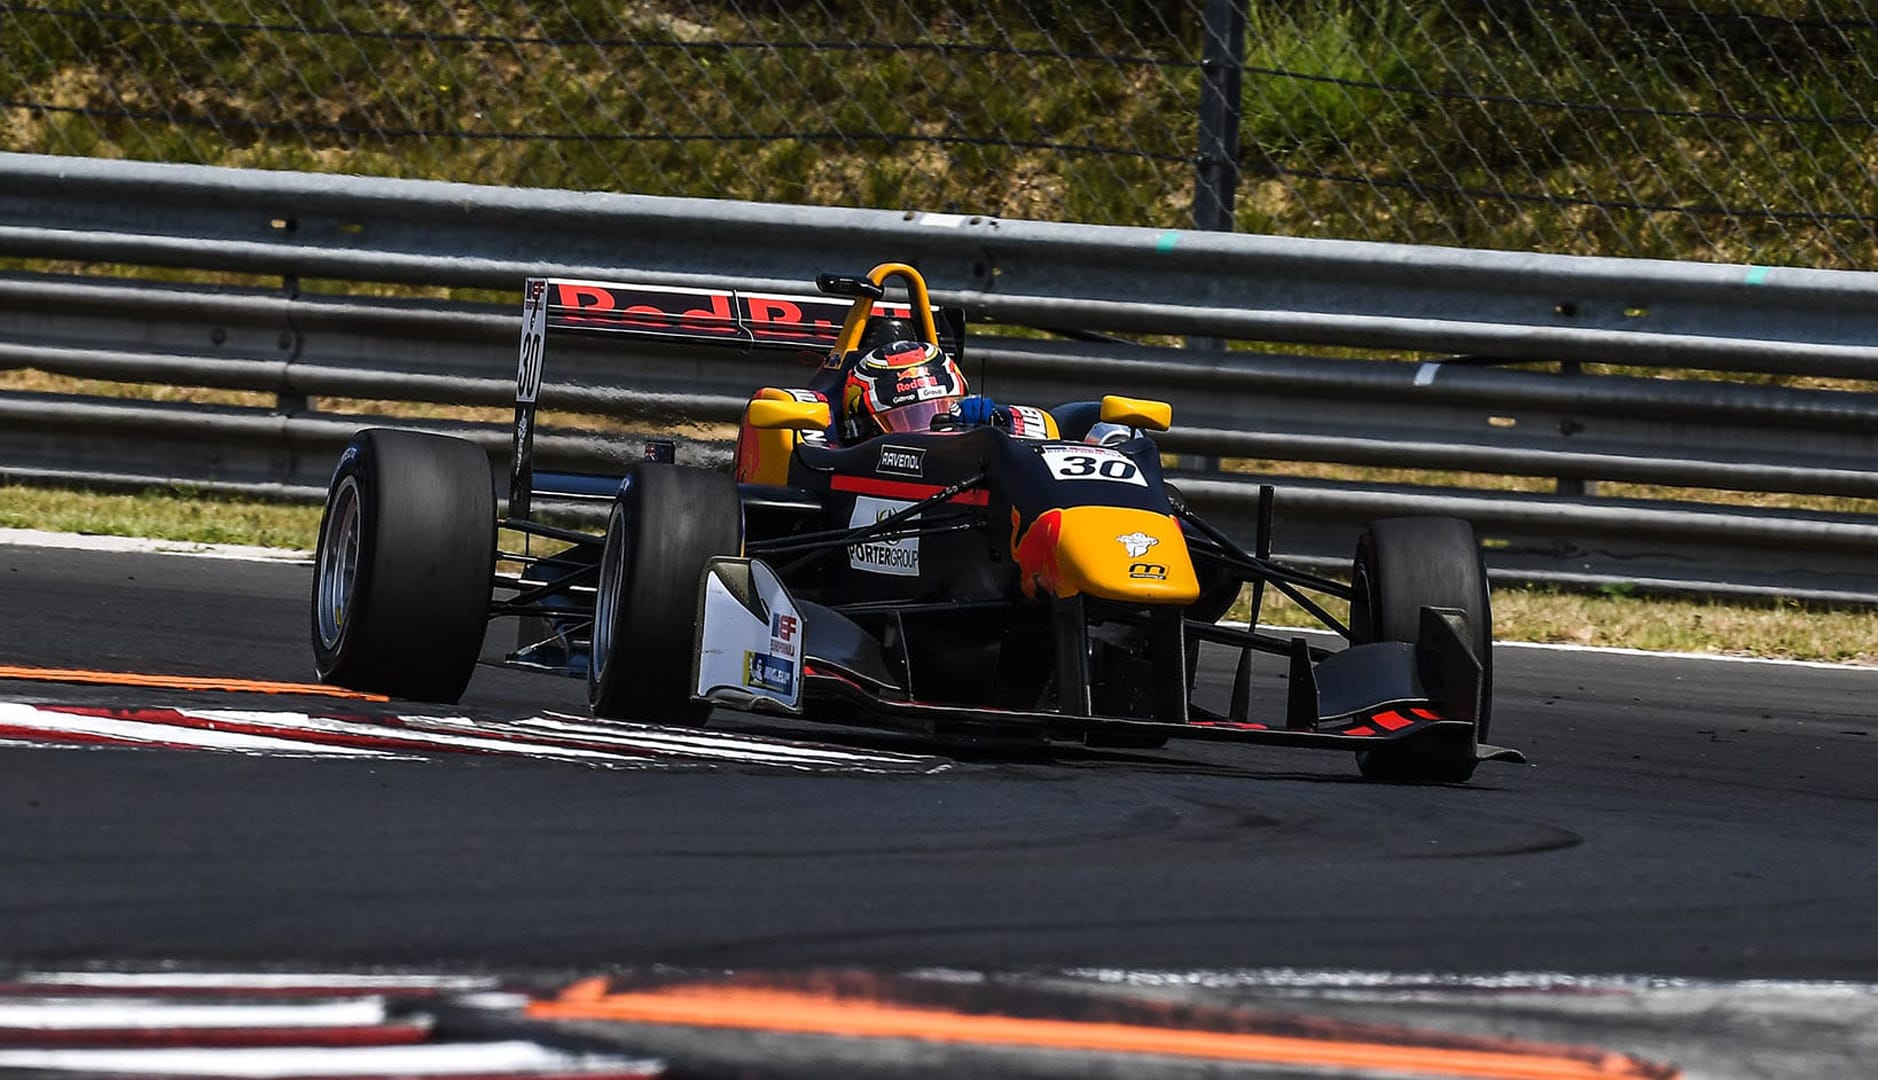 Lawson back on the podium in Hungary